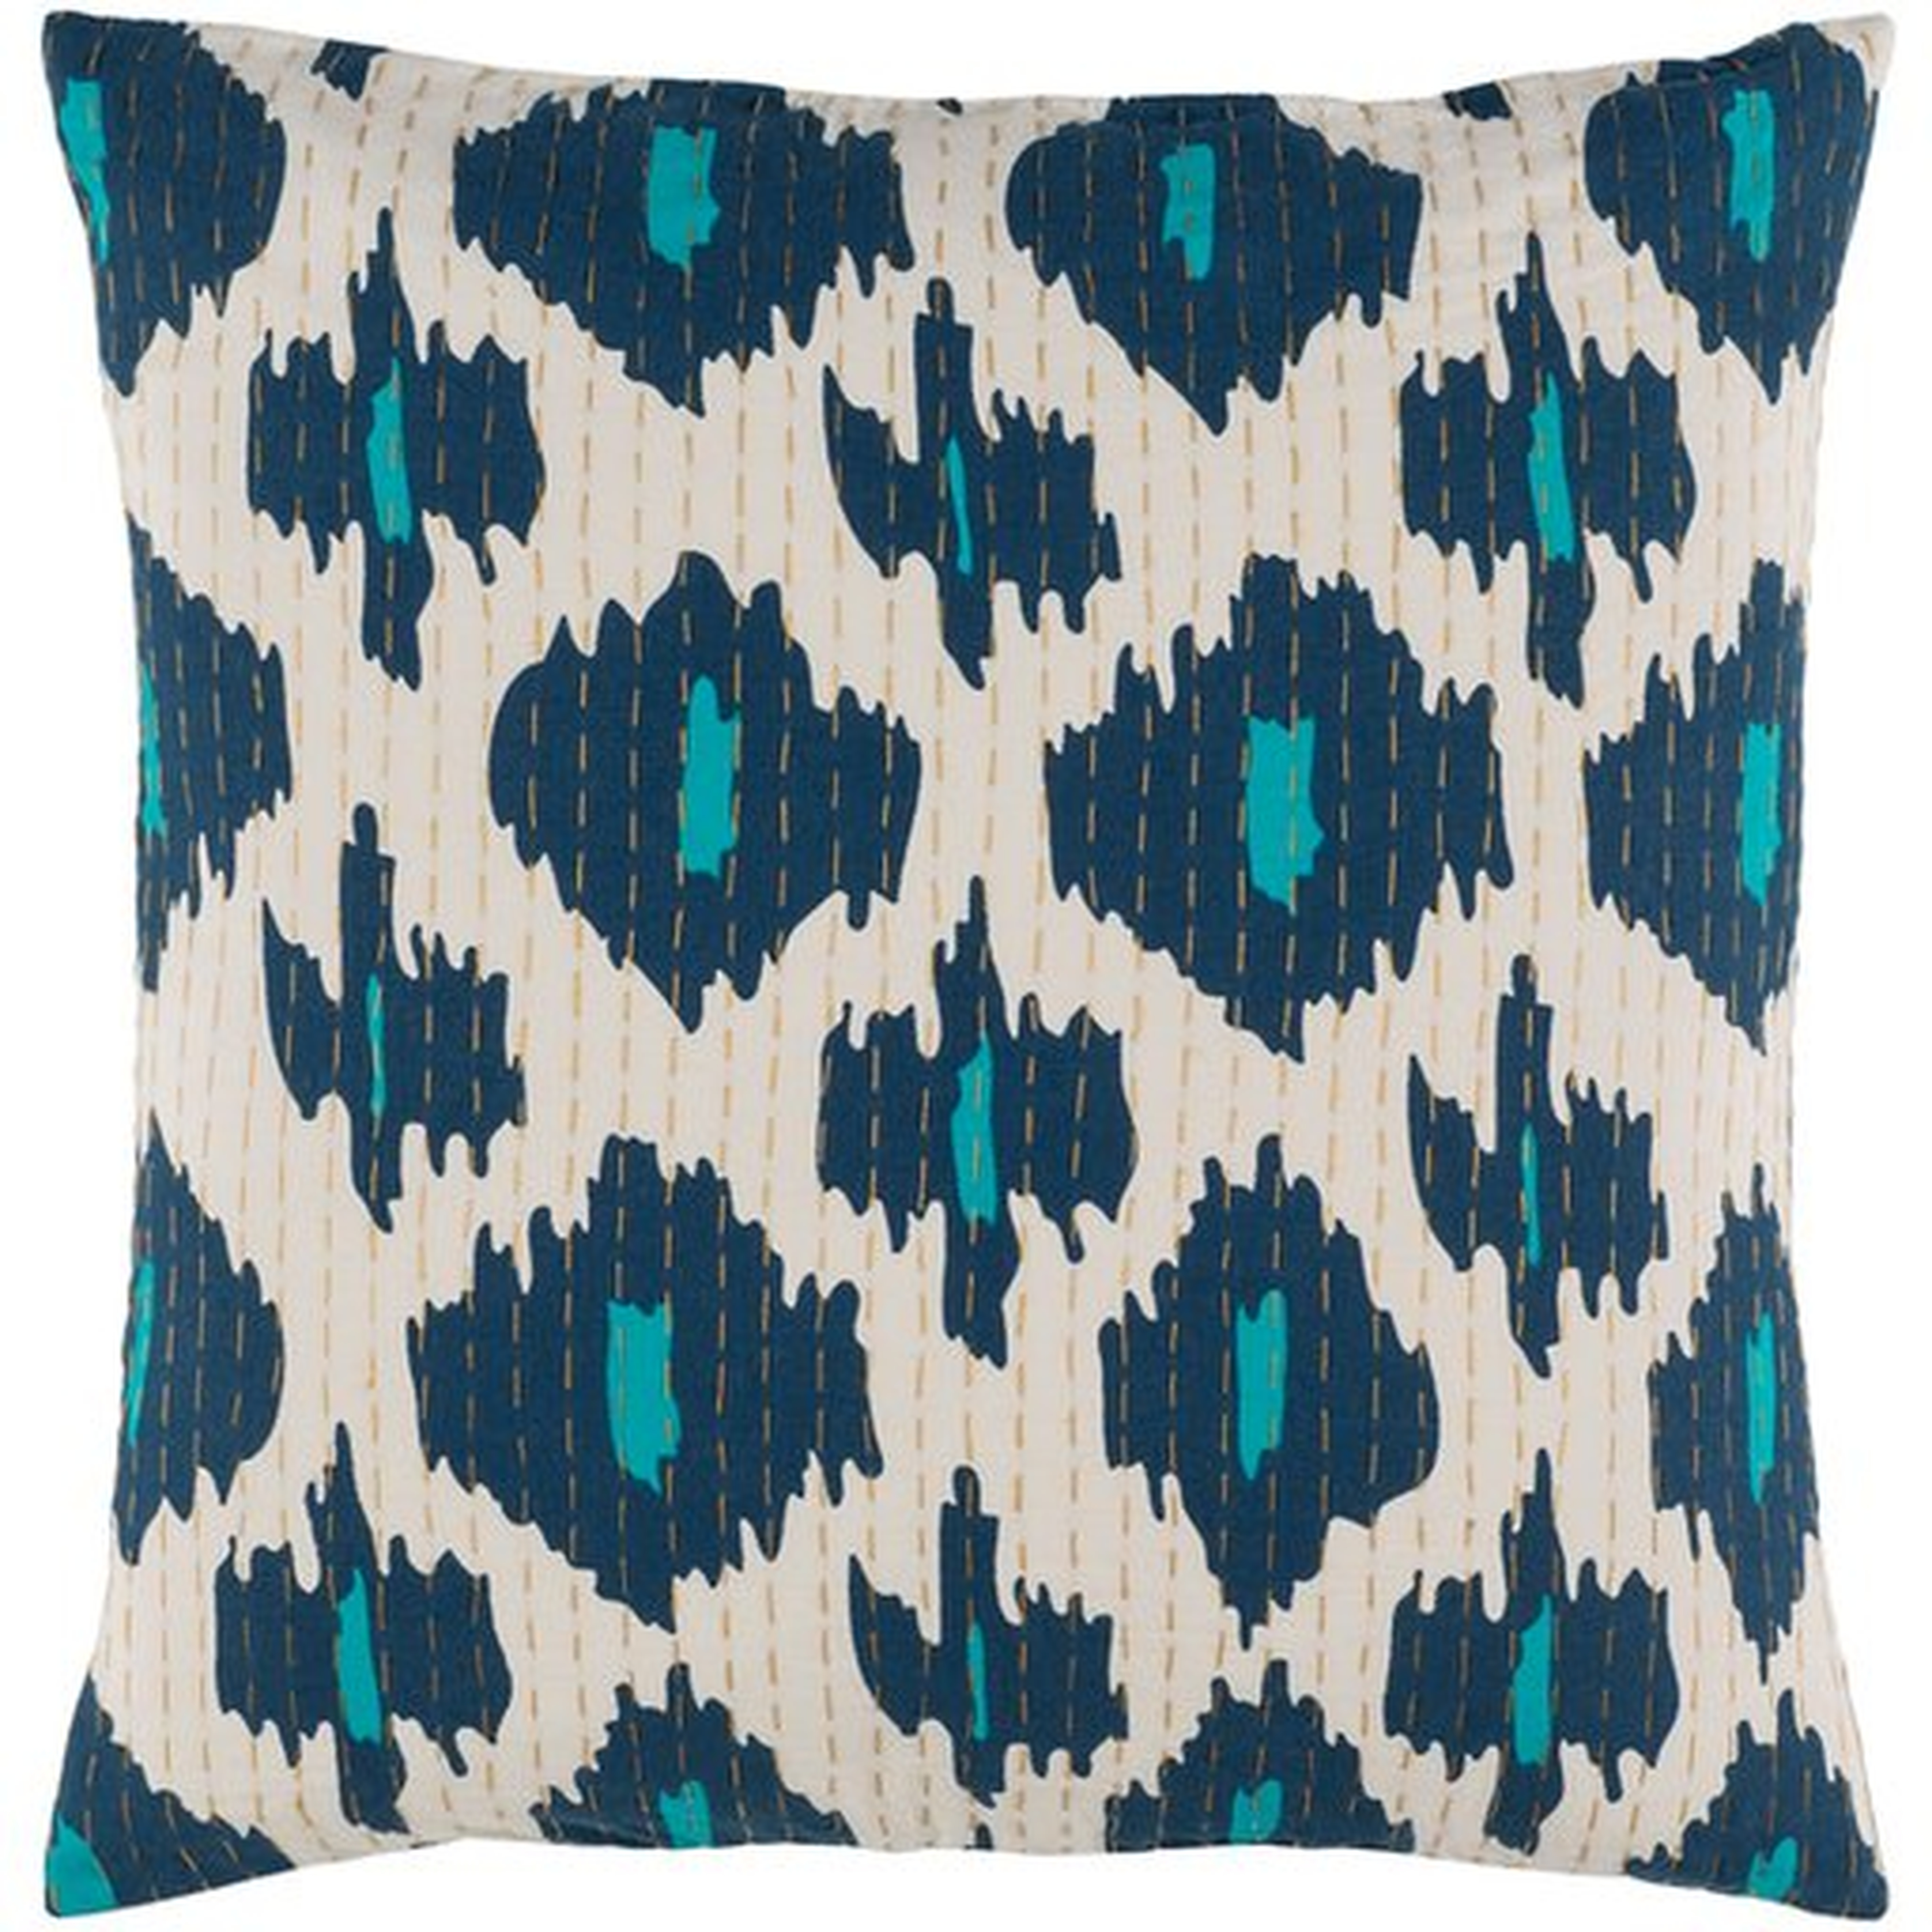 Kantha Throw Pillow, 18" x 18", with poly insert - Surya